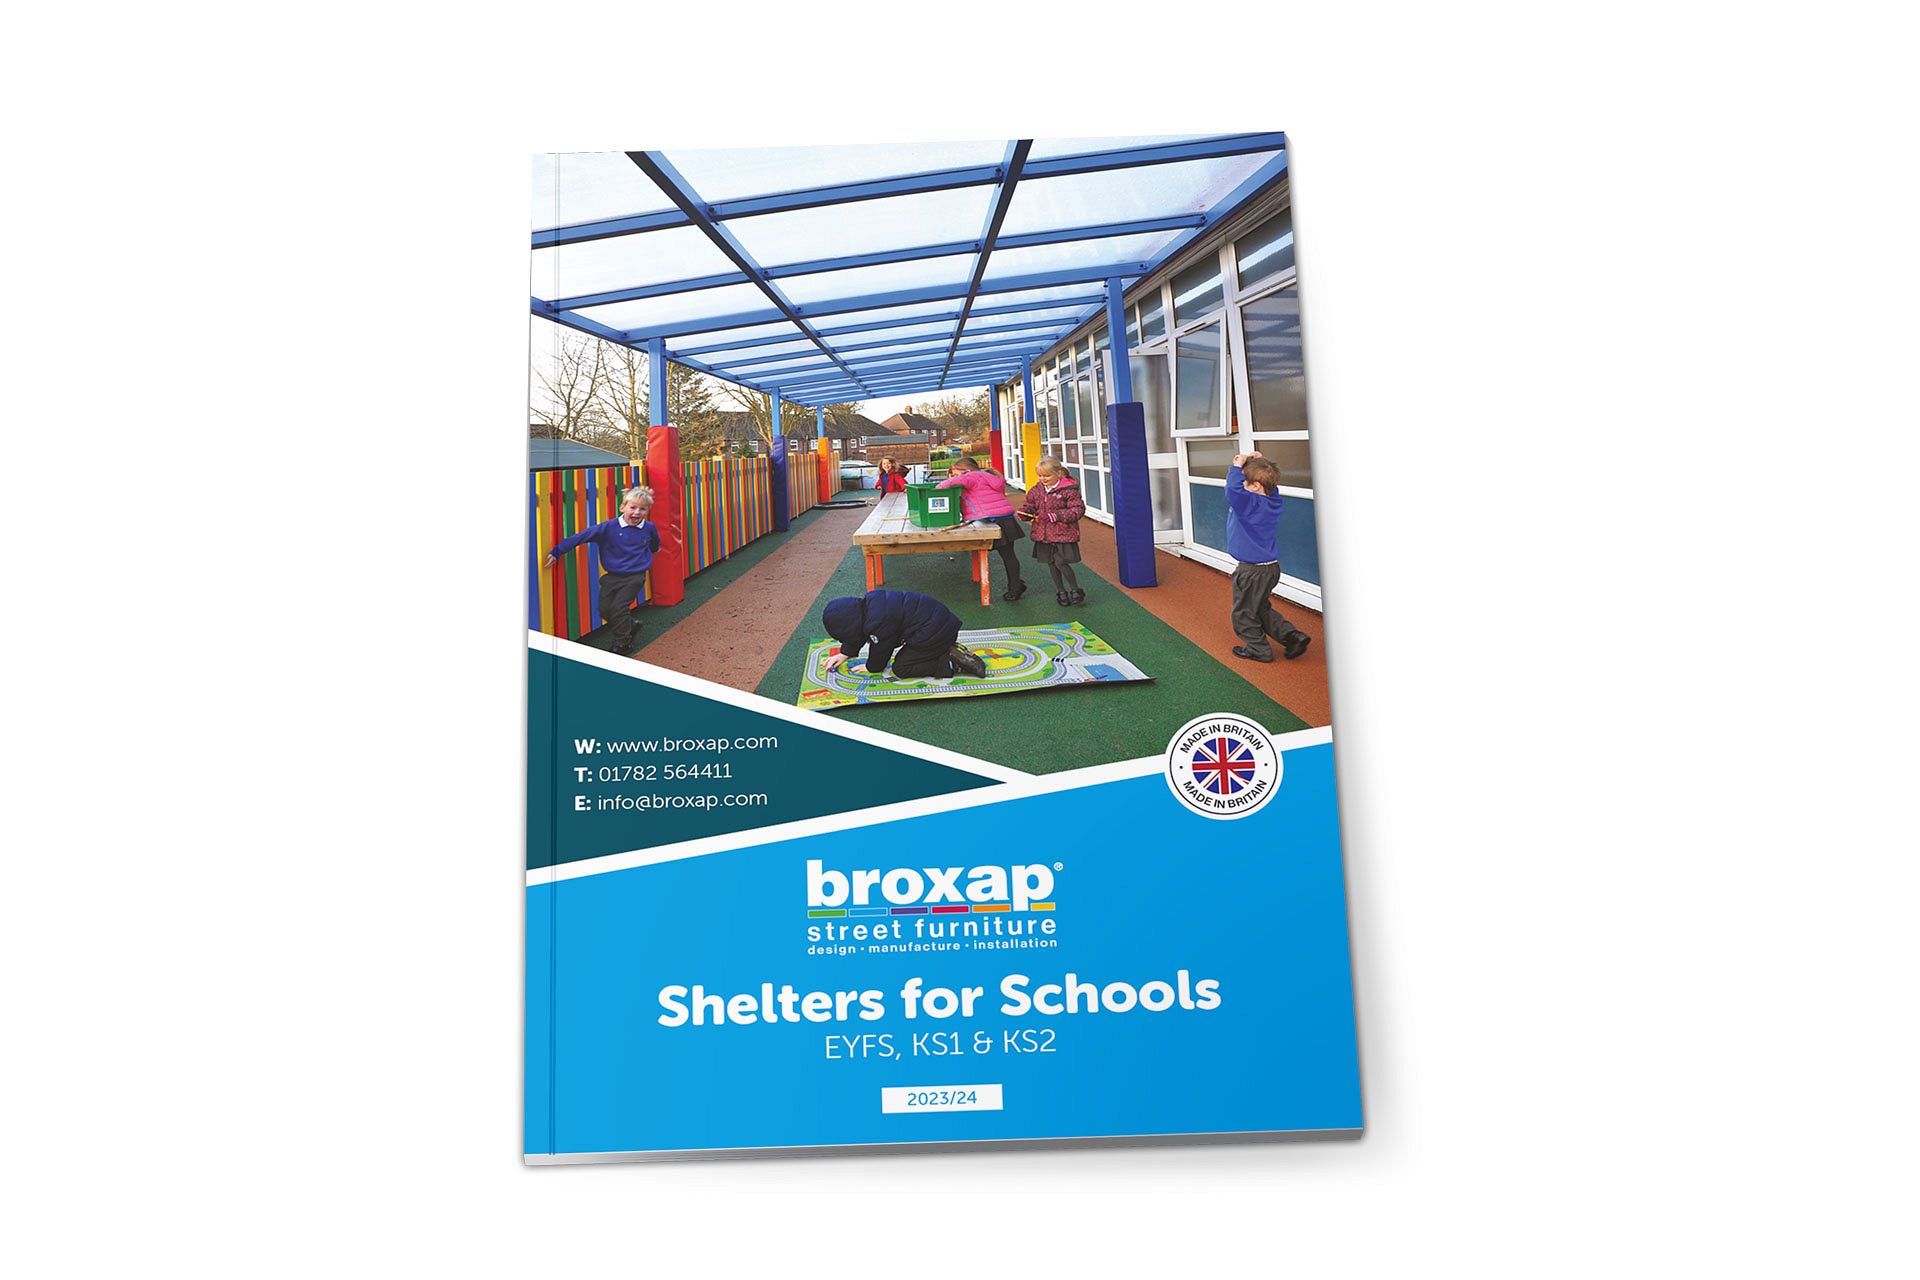 Shelters for Schools Brochure 2023/24